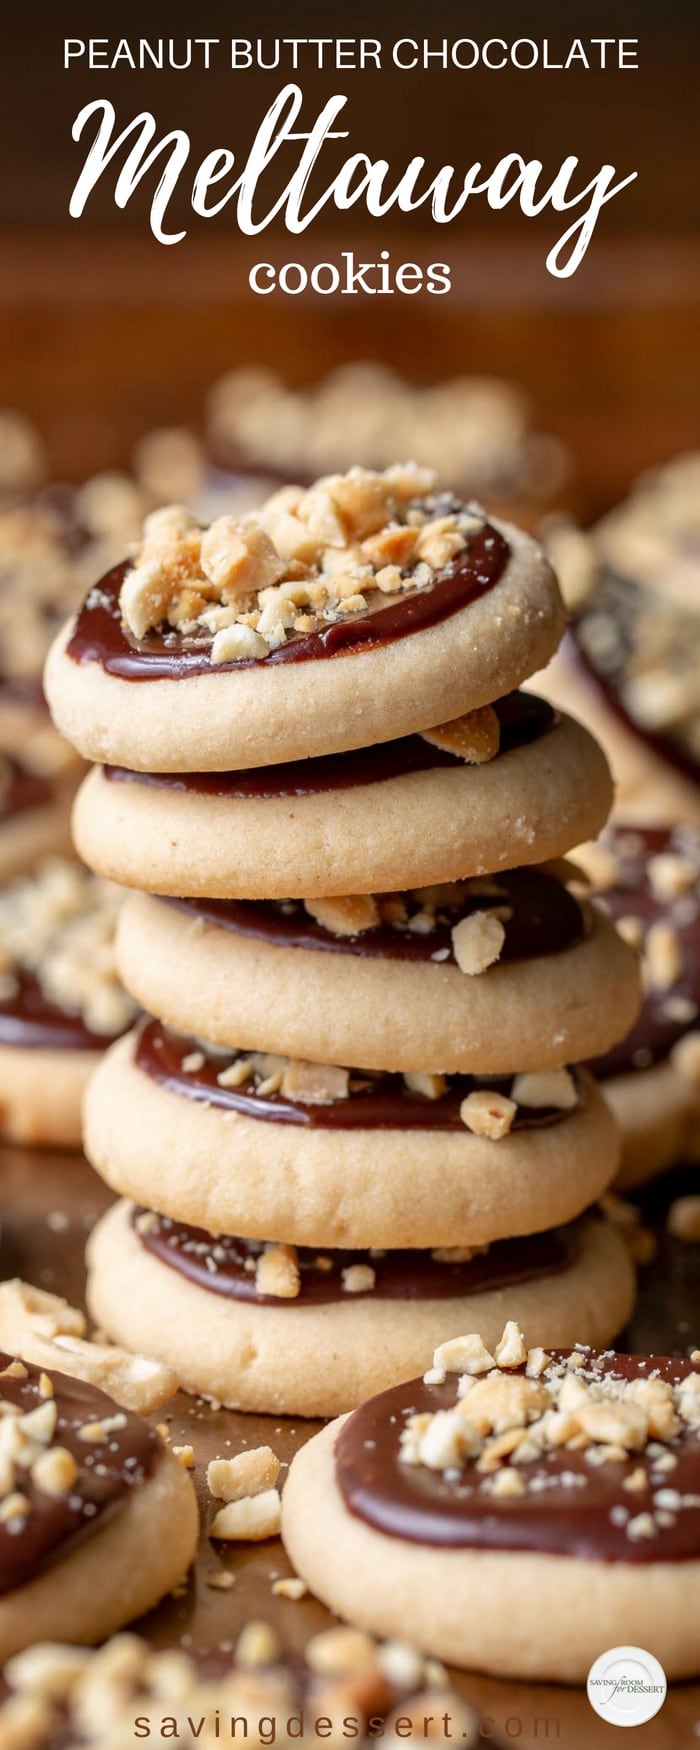 Peanut Butter Chocolate Meltaway Cookies for the chocolate and peanut butter lover in your life! These light little bite-sized cookies are not too sweet and have a nice salty bite from the crushed roasted peanuts. #savingroomfordessert #meltaways #meltawaycookies #chocolatepeanutbutter #peanutbuttercookies #chocolateglaze #peanutcookies #cookies